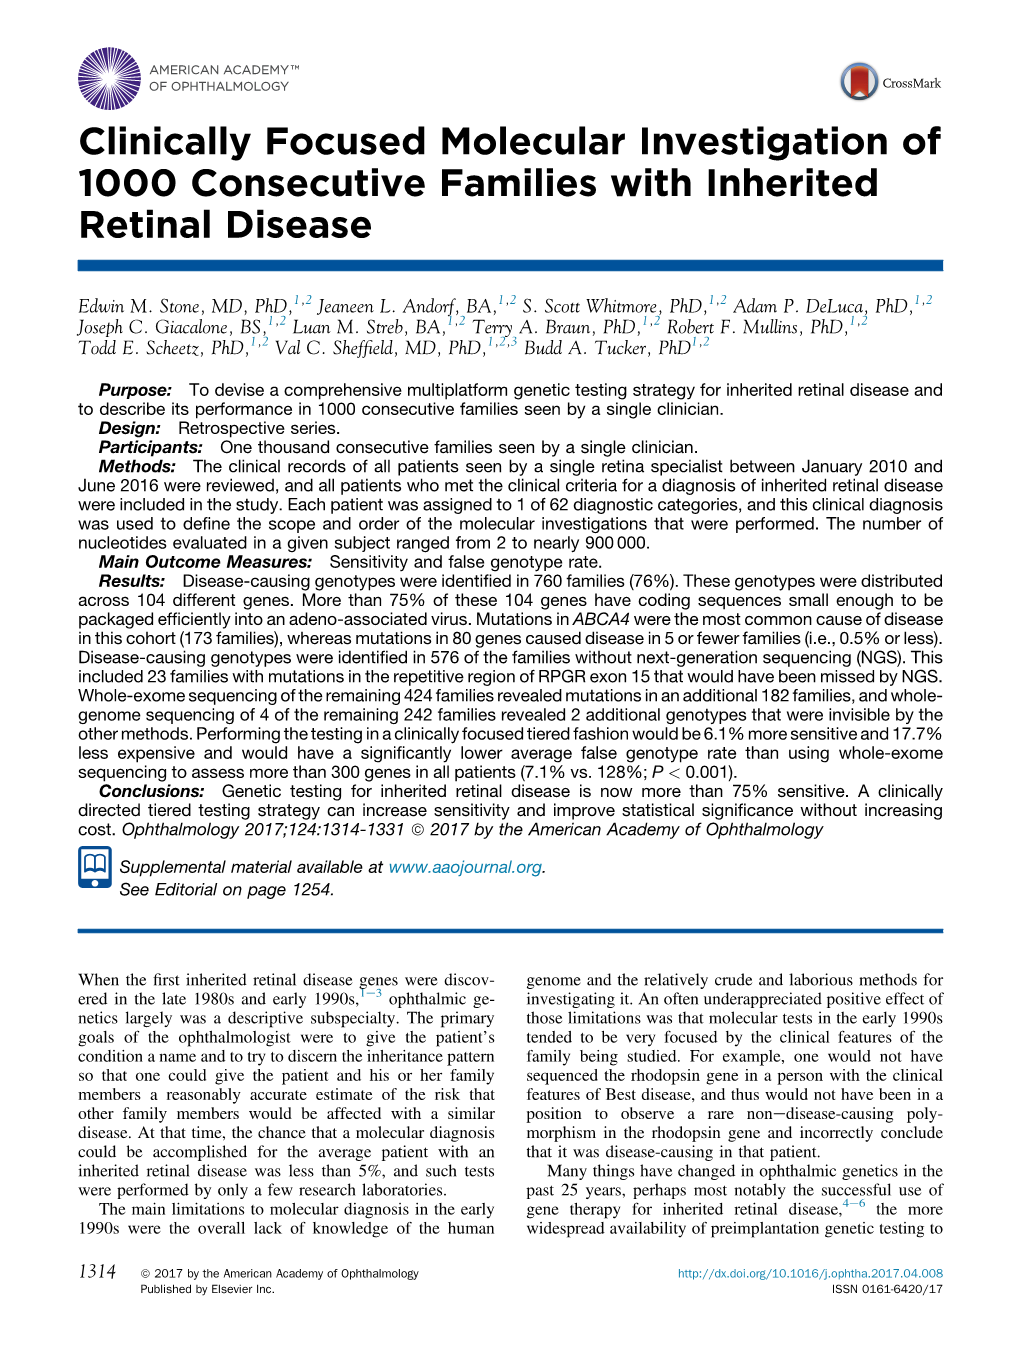 Clinically Focused Molecular Investigation of 1000 Consecutive Families with Inherited Retinal Disease